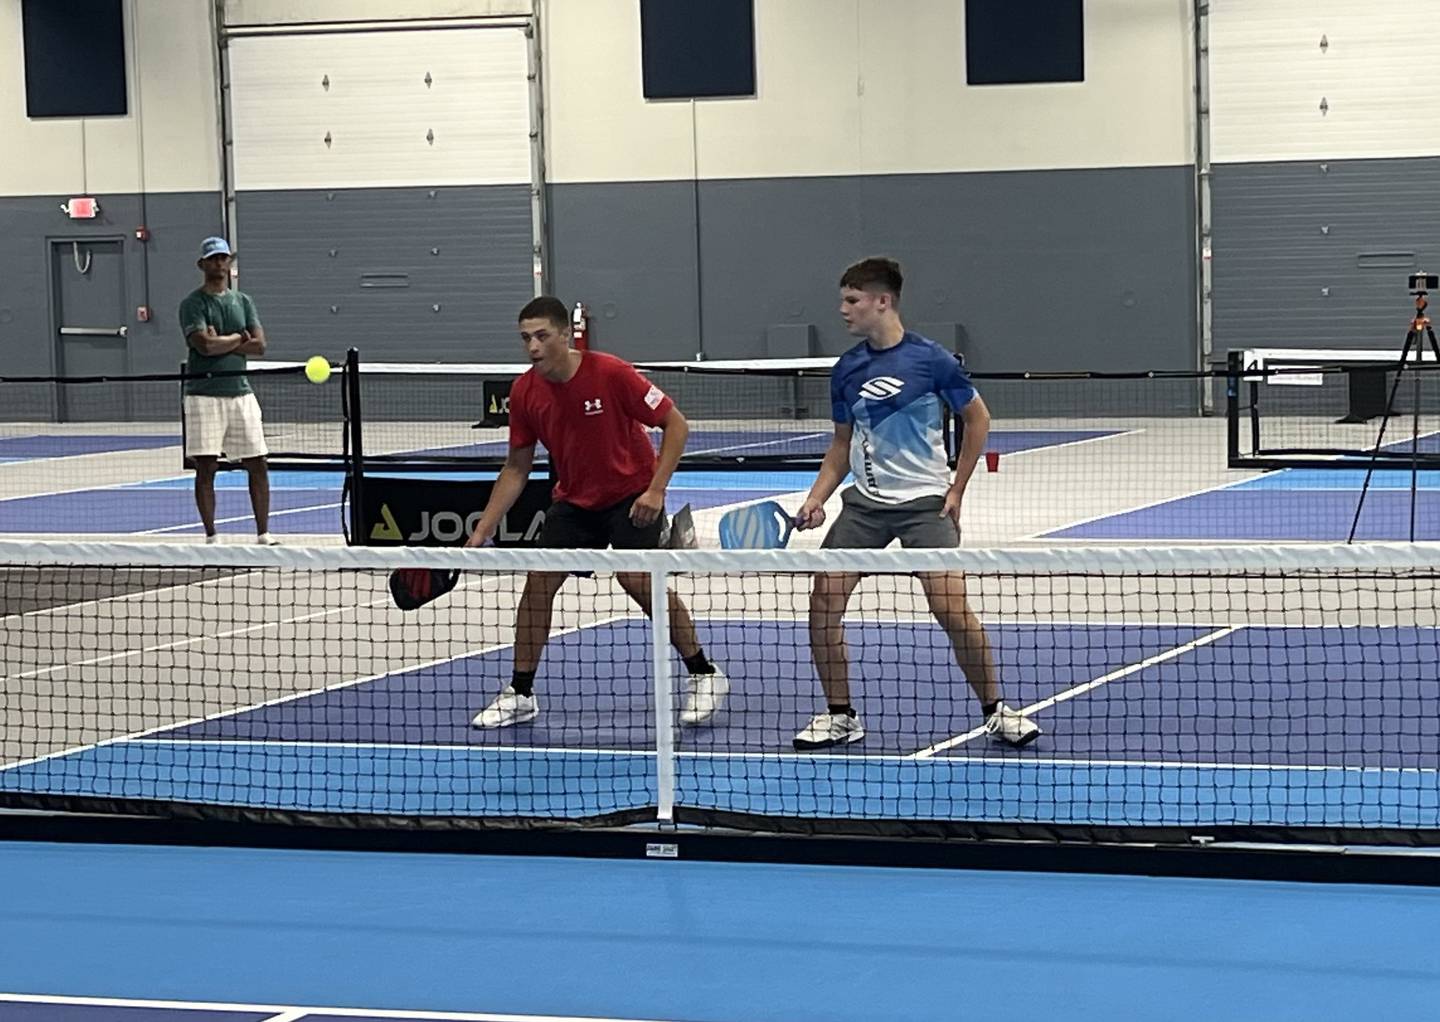 The Yorkville team of Carson Converse and Josiah Aguado compete in the first unofficial Illinois High School Pickleball Championship in June in Naperville.